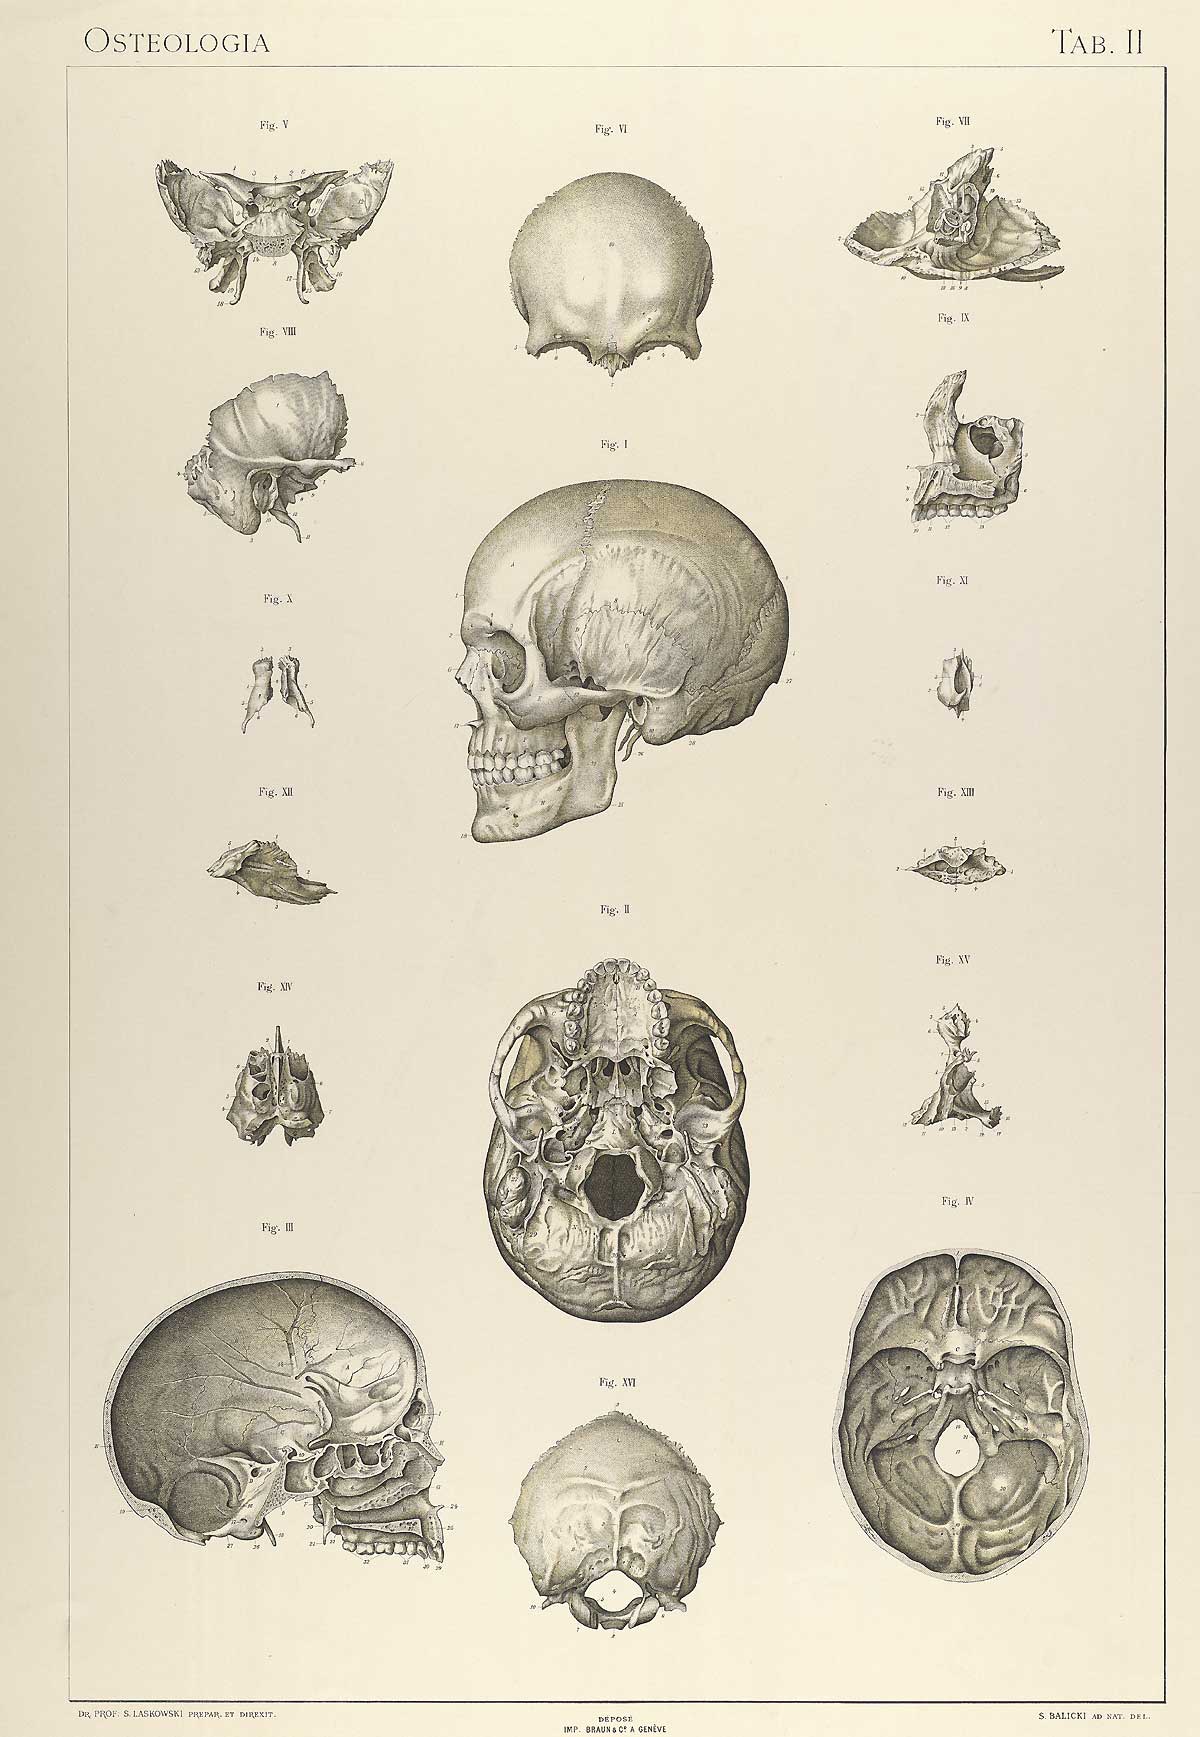 Plate 2 of Sigismond Laskowski's Anatomie normale du corps humain, featuring various views of a skull.